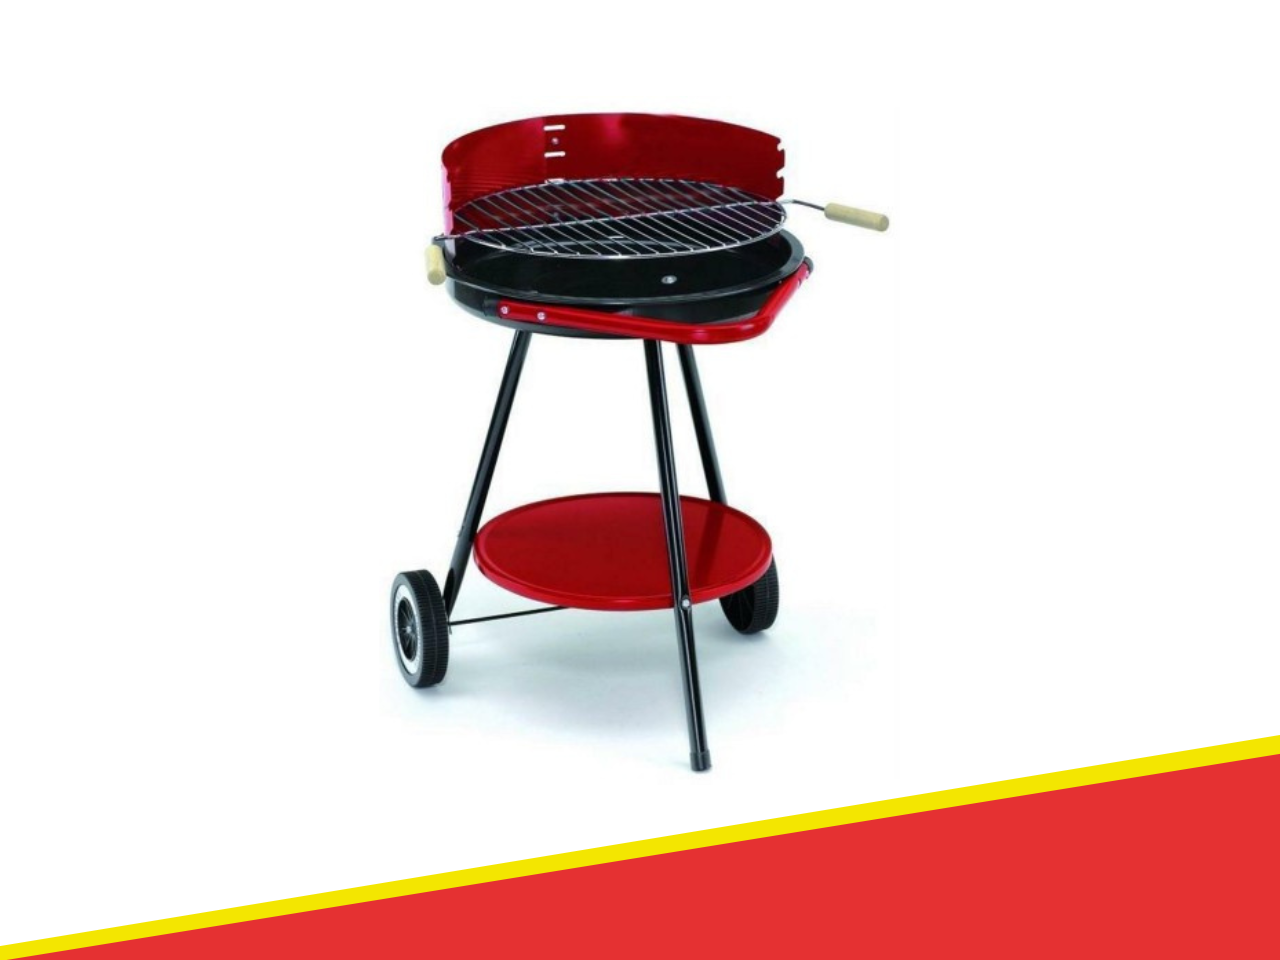 905805 - BARBECUE RONDY-48 BLINKY